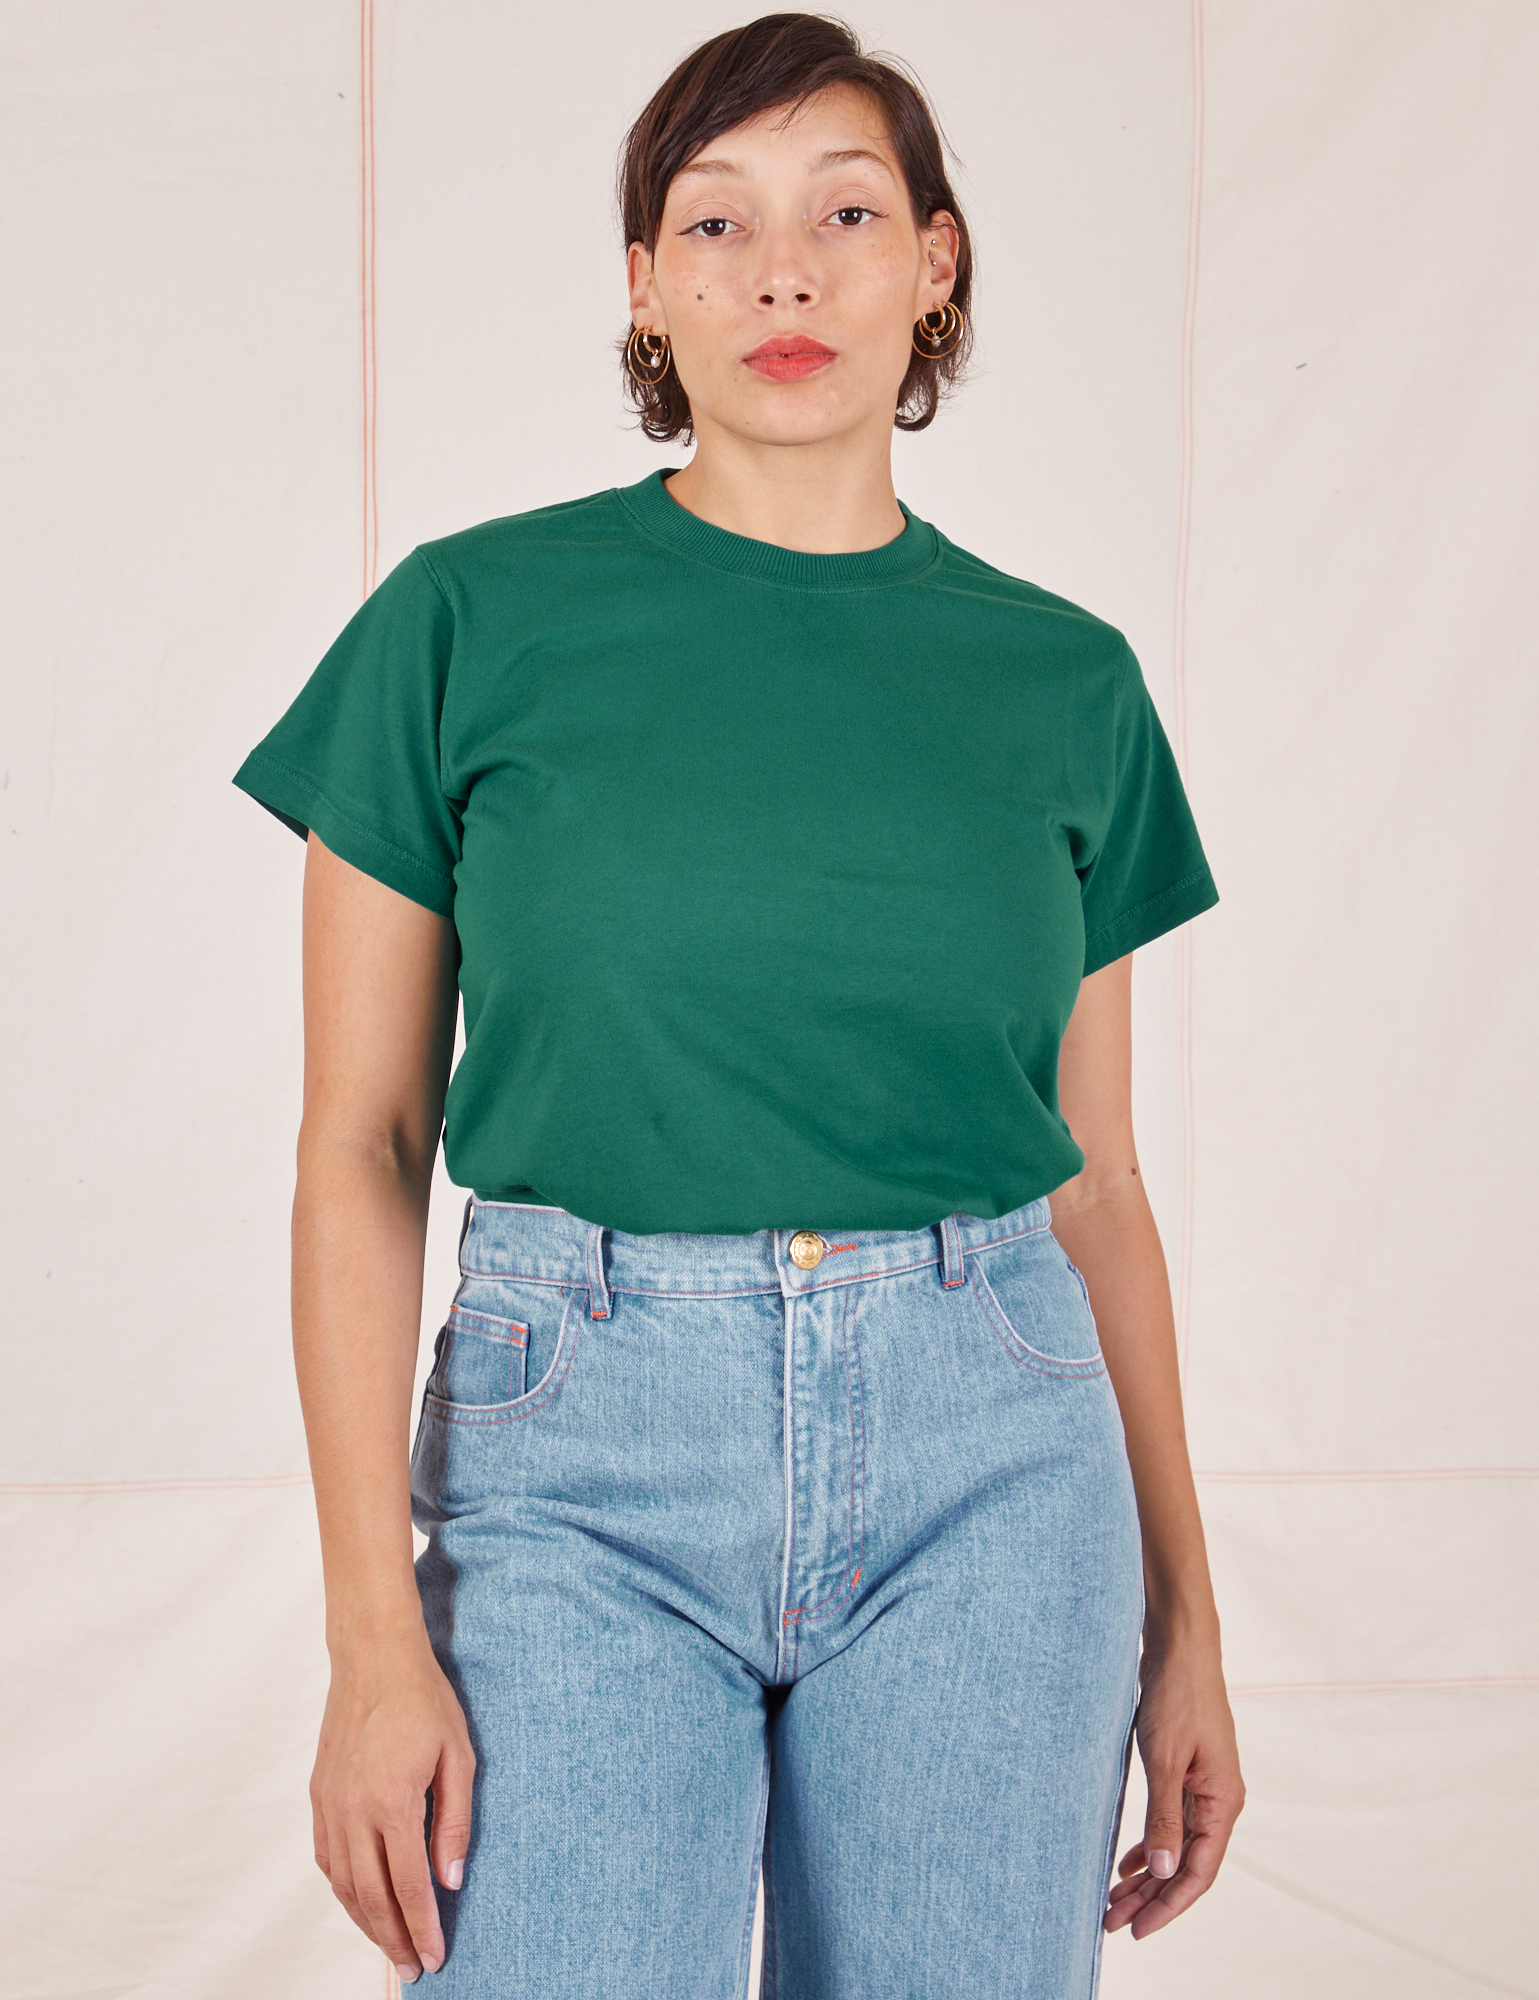 Tiara is wearing Organic Vintage Tee in Hunter Green tucked into light wash Sailor Jeans